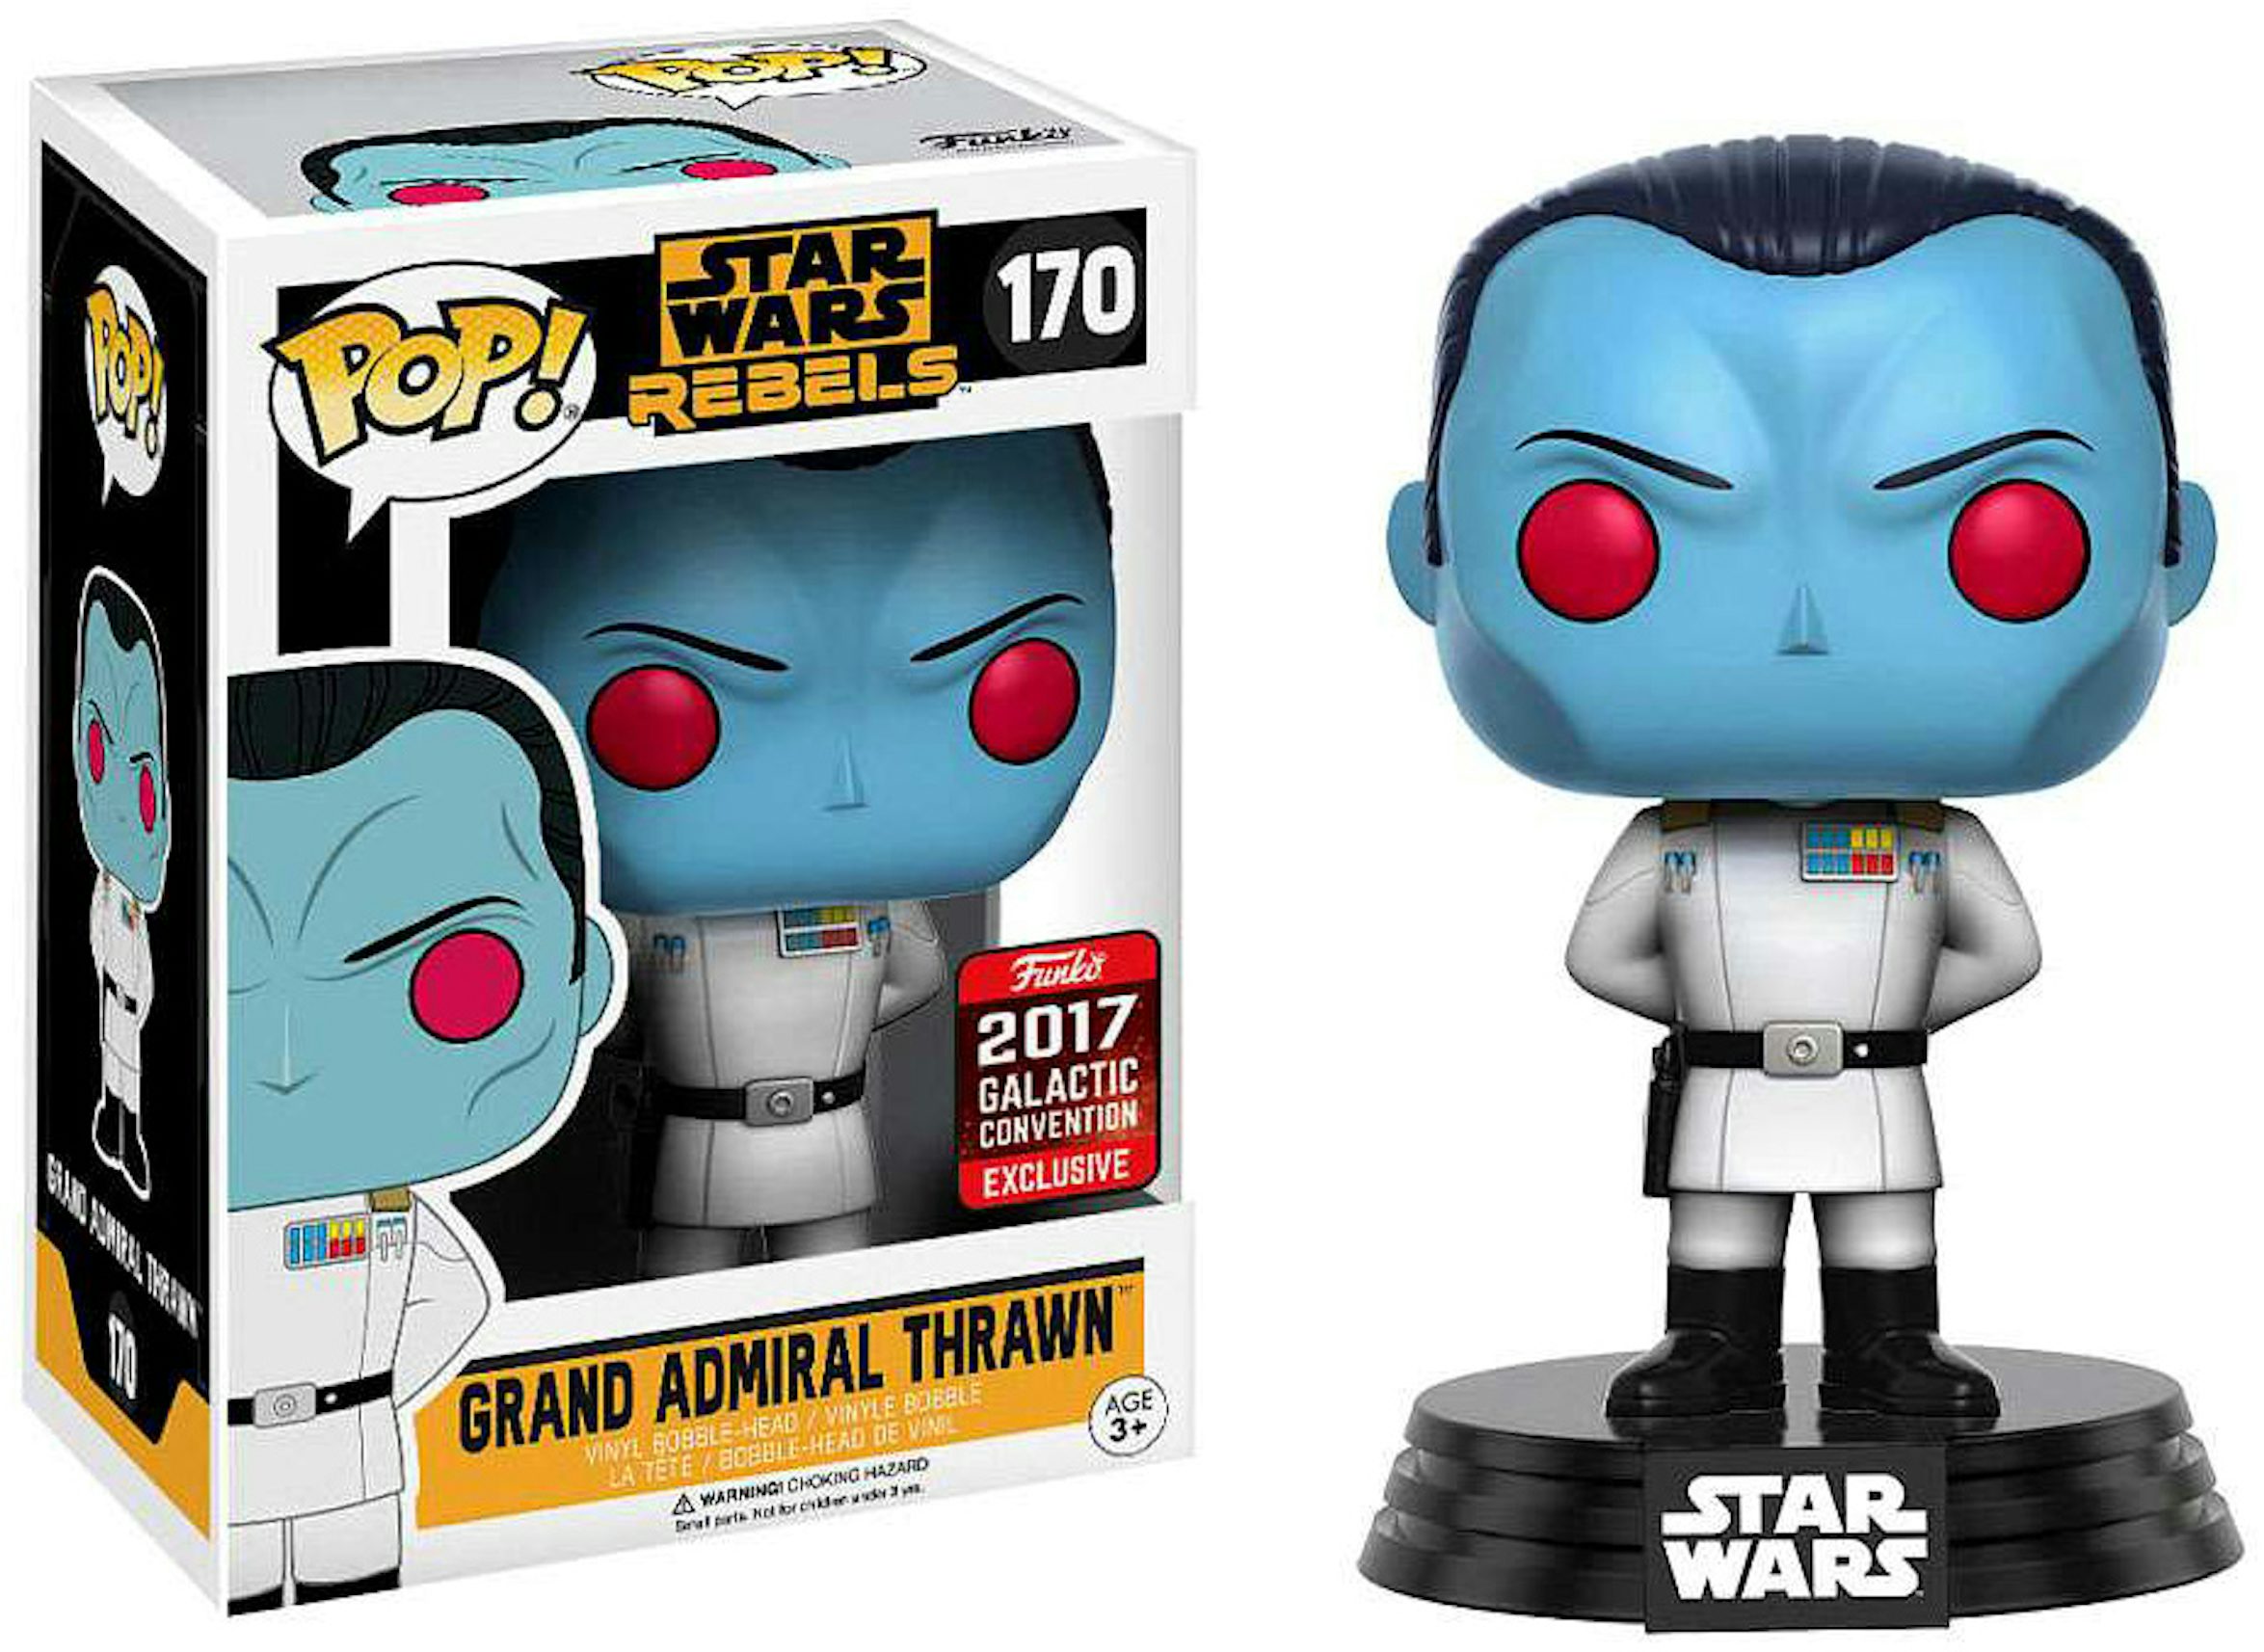 https://images.stockx.com/images/Funko-Pop-Star-Wars-Rebels-Grand-Admiral-Thrawn-2017-Galactic-Convention-Exclusive-Figure-170.jpg?fit=fill&bg=FFFFFF&w=1200&h=857&fm=jpg&auto=compress&dpr=2&trim=color&updated_at=1634244473&q=60